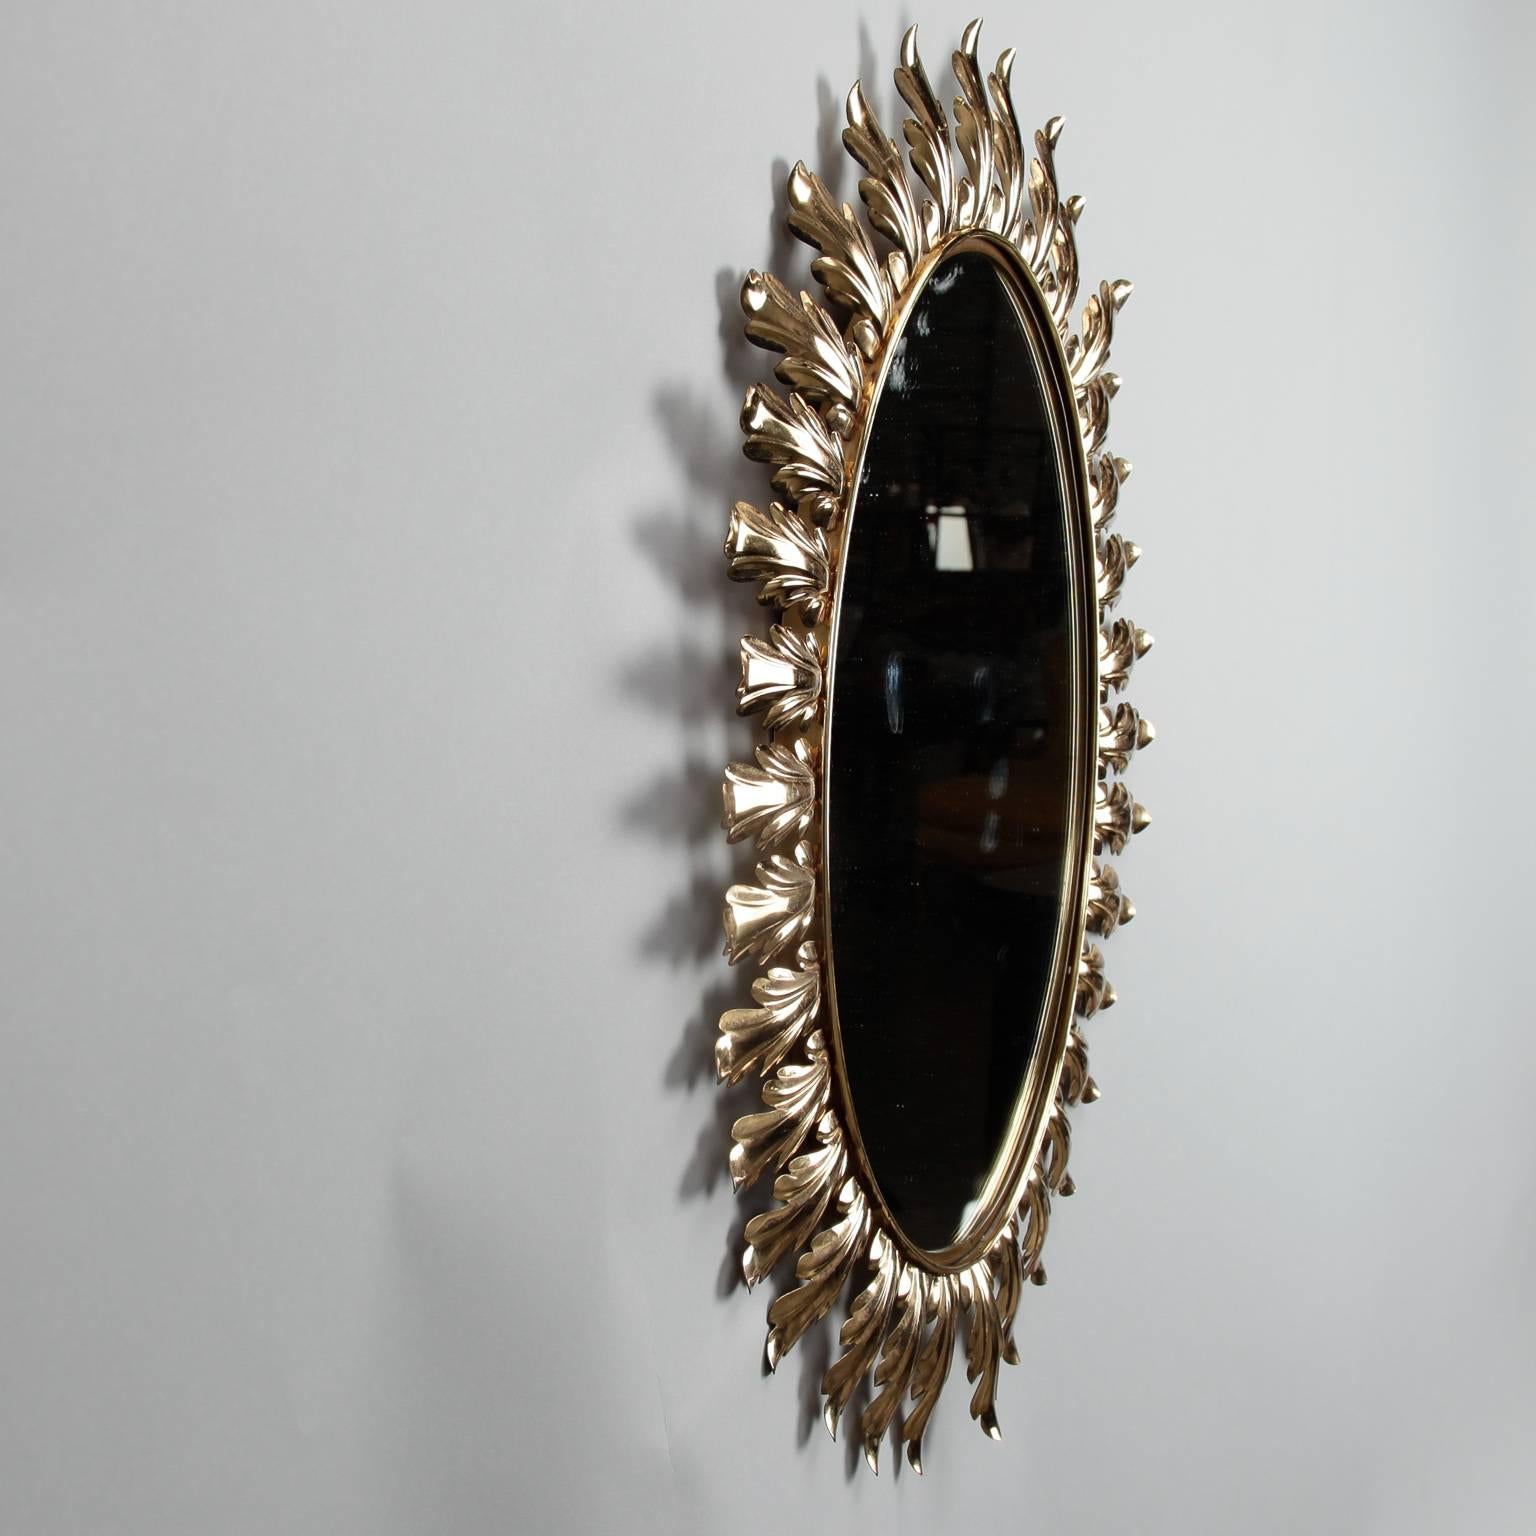 Italian oval mirror has a gold tone metal frame with acanthus leaf sunburst pattern, circa 1960s.